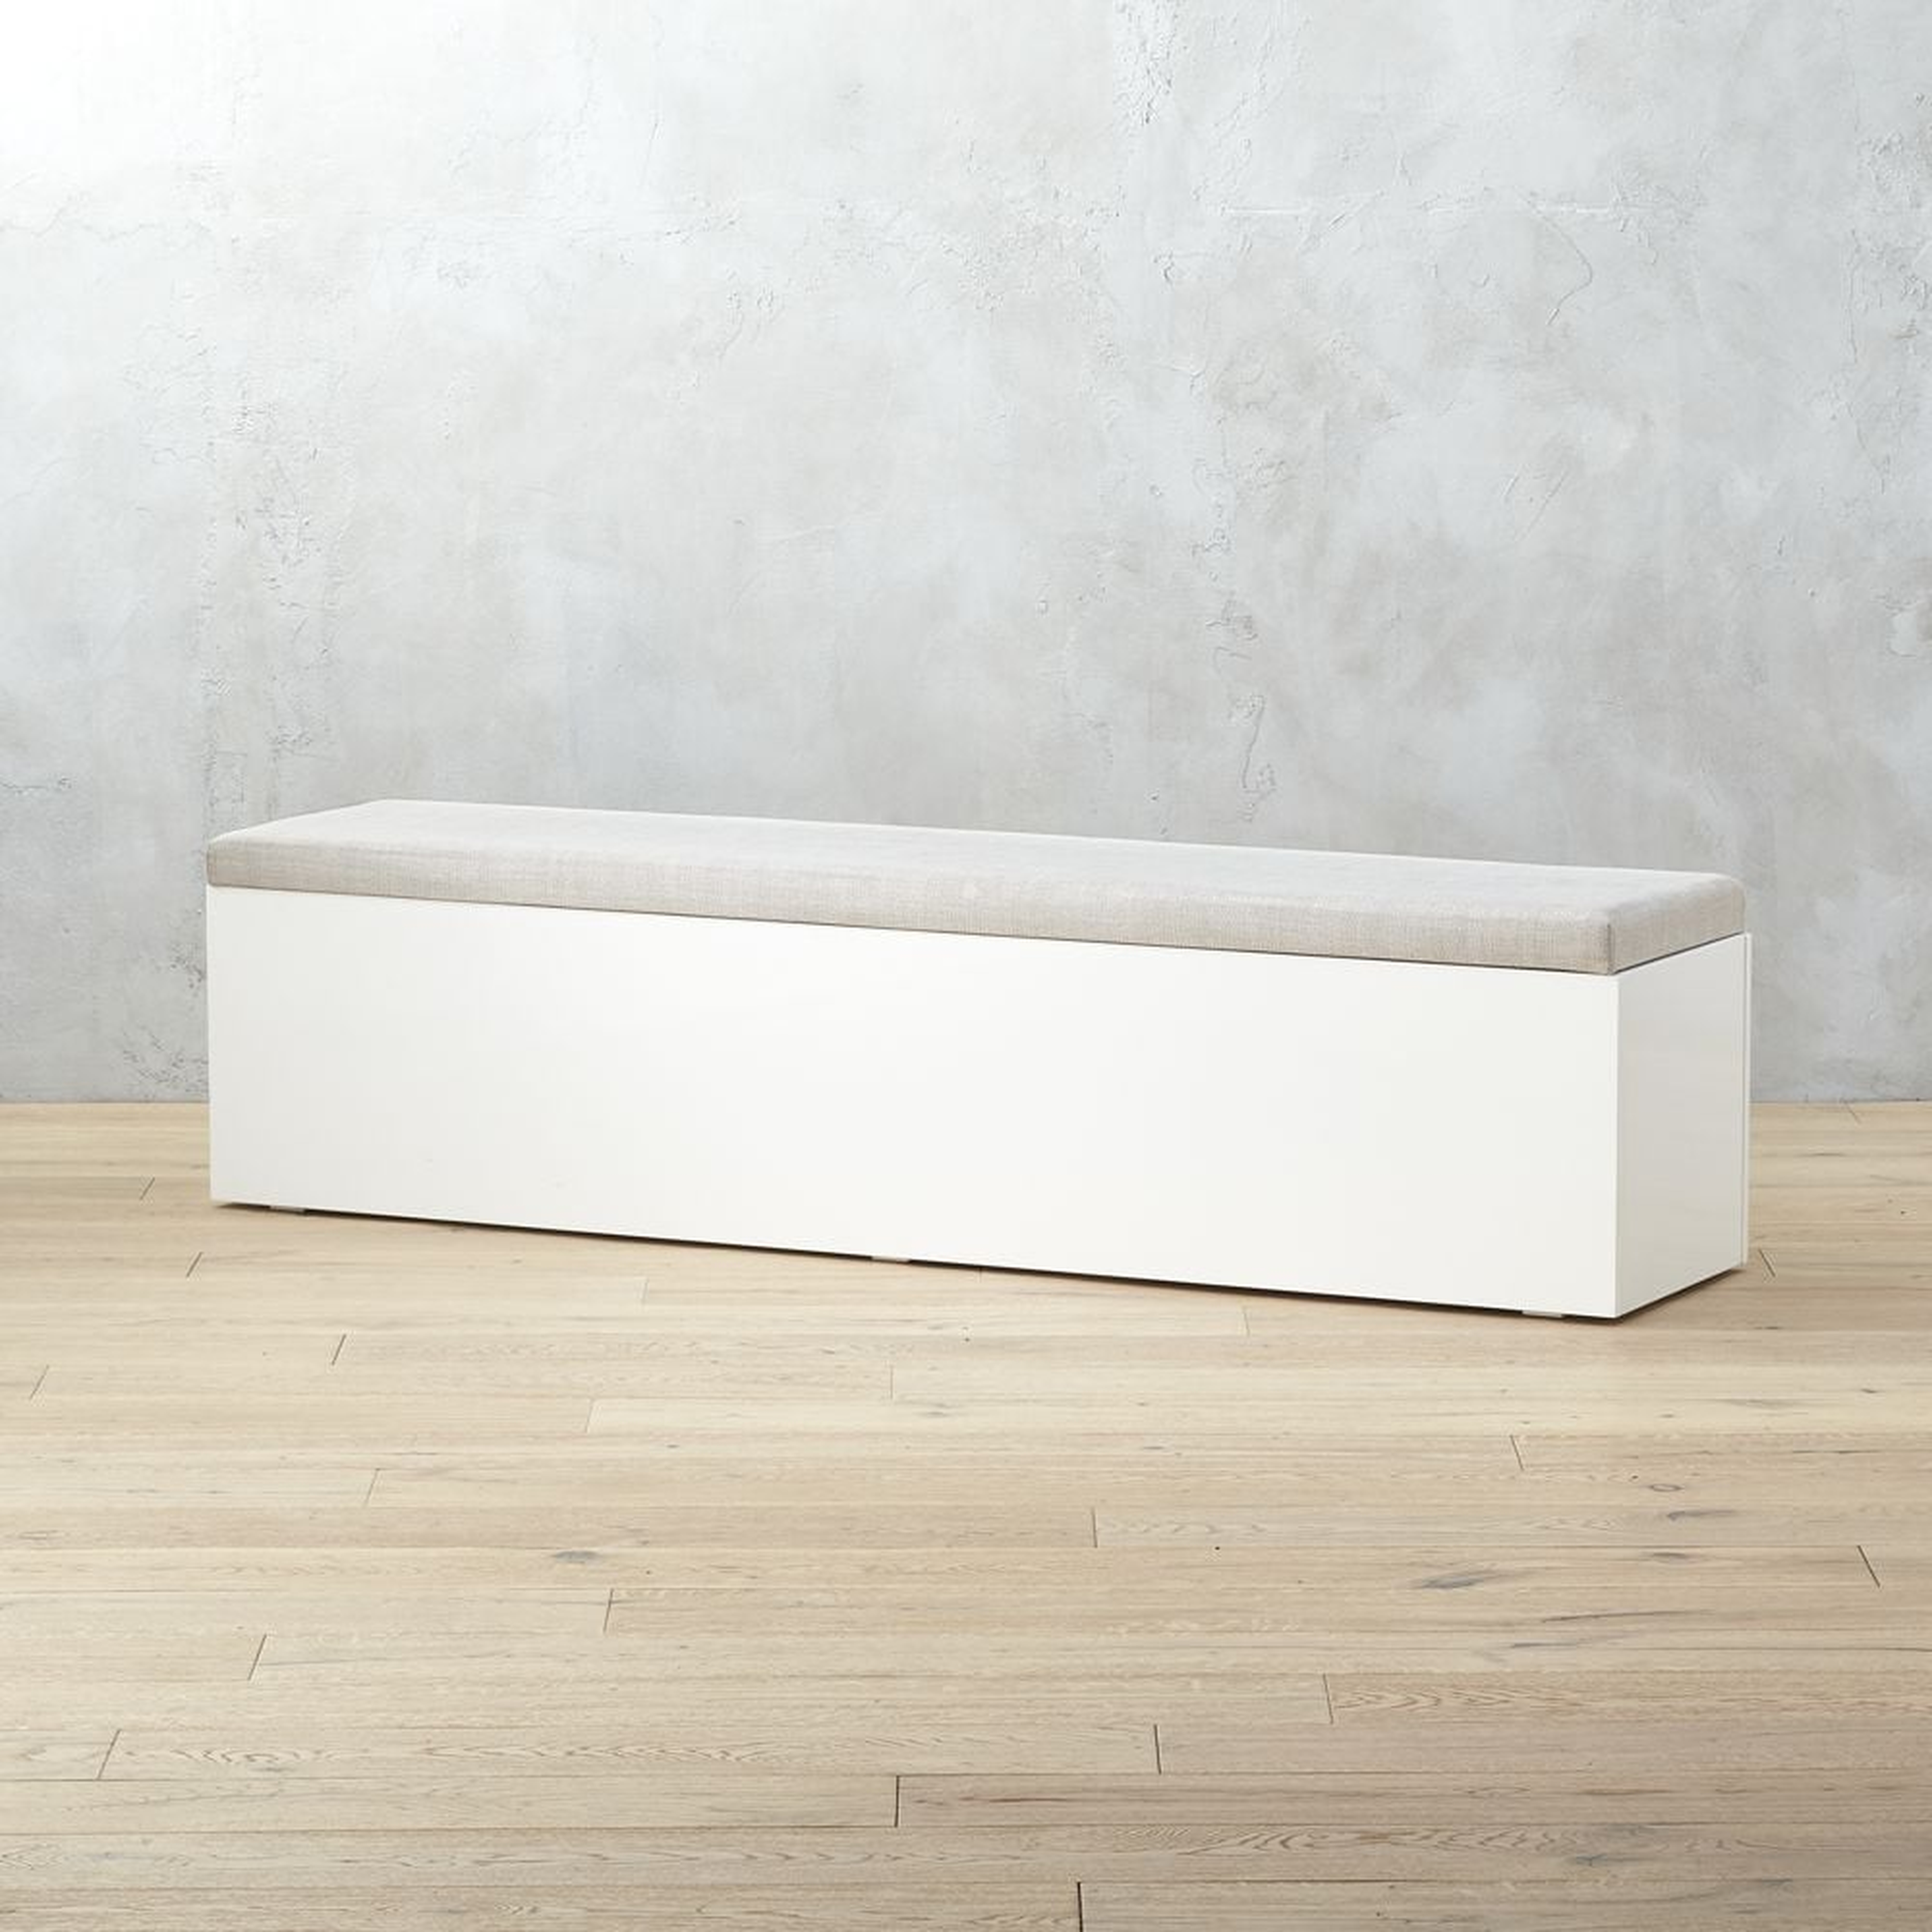 Catch-All Large White Storage Bench,Restock in early December,2022. - CB2